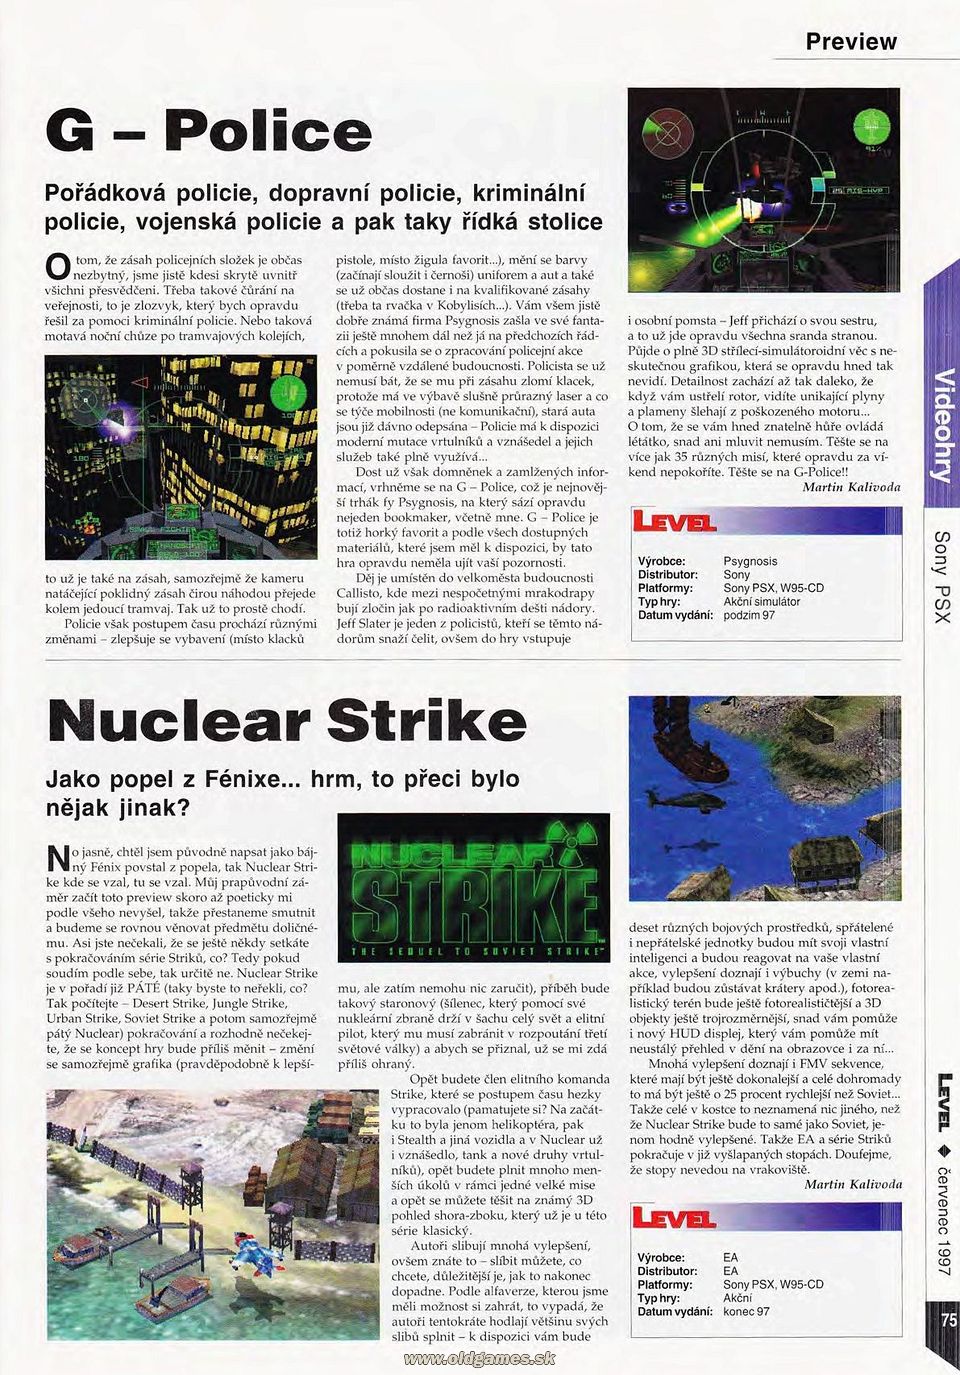 Preview: G-Police, Nuclear Strike